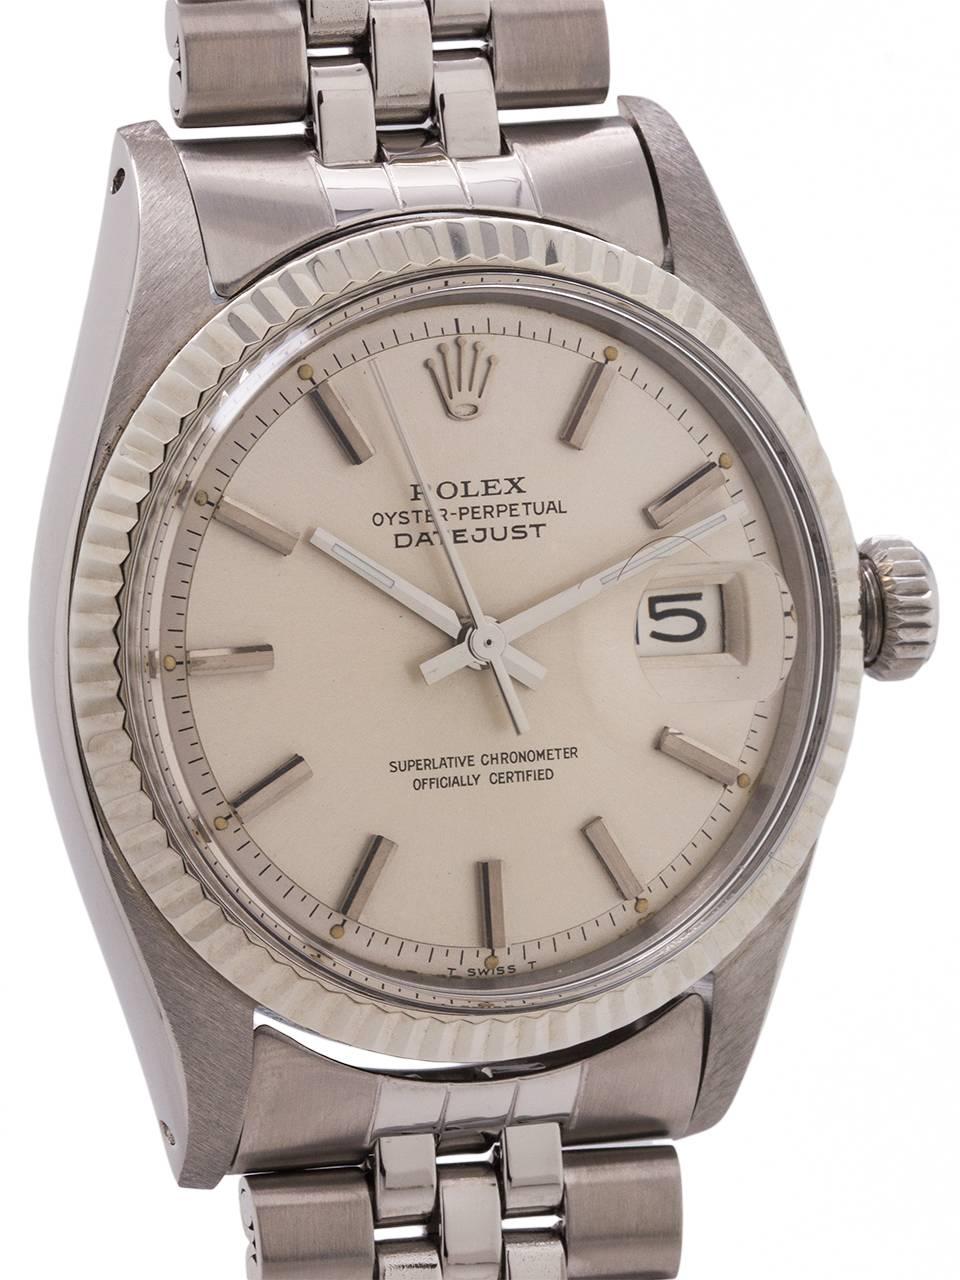 
Rolex Stainless Steel Datejust ref # 1601 serial# 1.8 million circa 1968. 36mm diameter case with 14K white gold fluted bezel and acrylic crystal. Original silvered satin pie pan dial with applied silver indexes and silver baton hands. Powered by